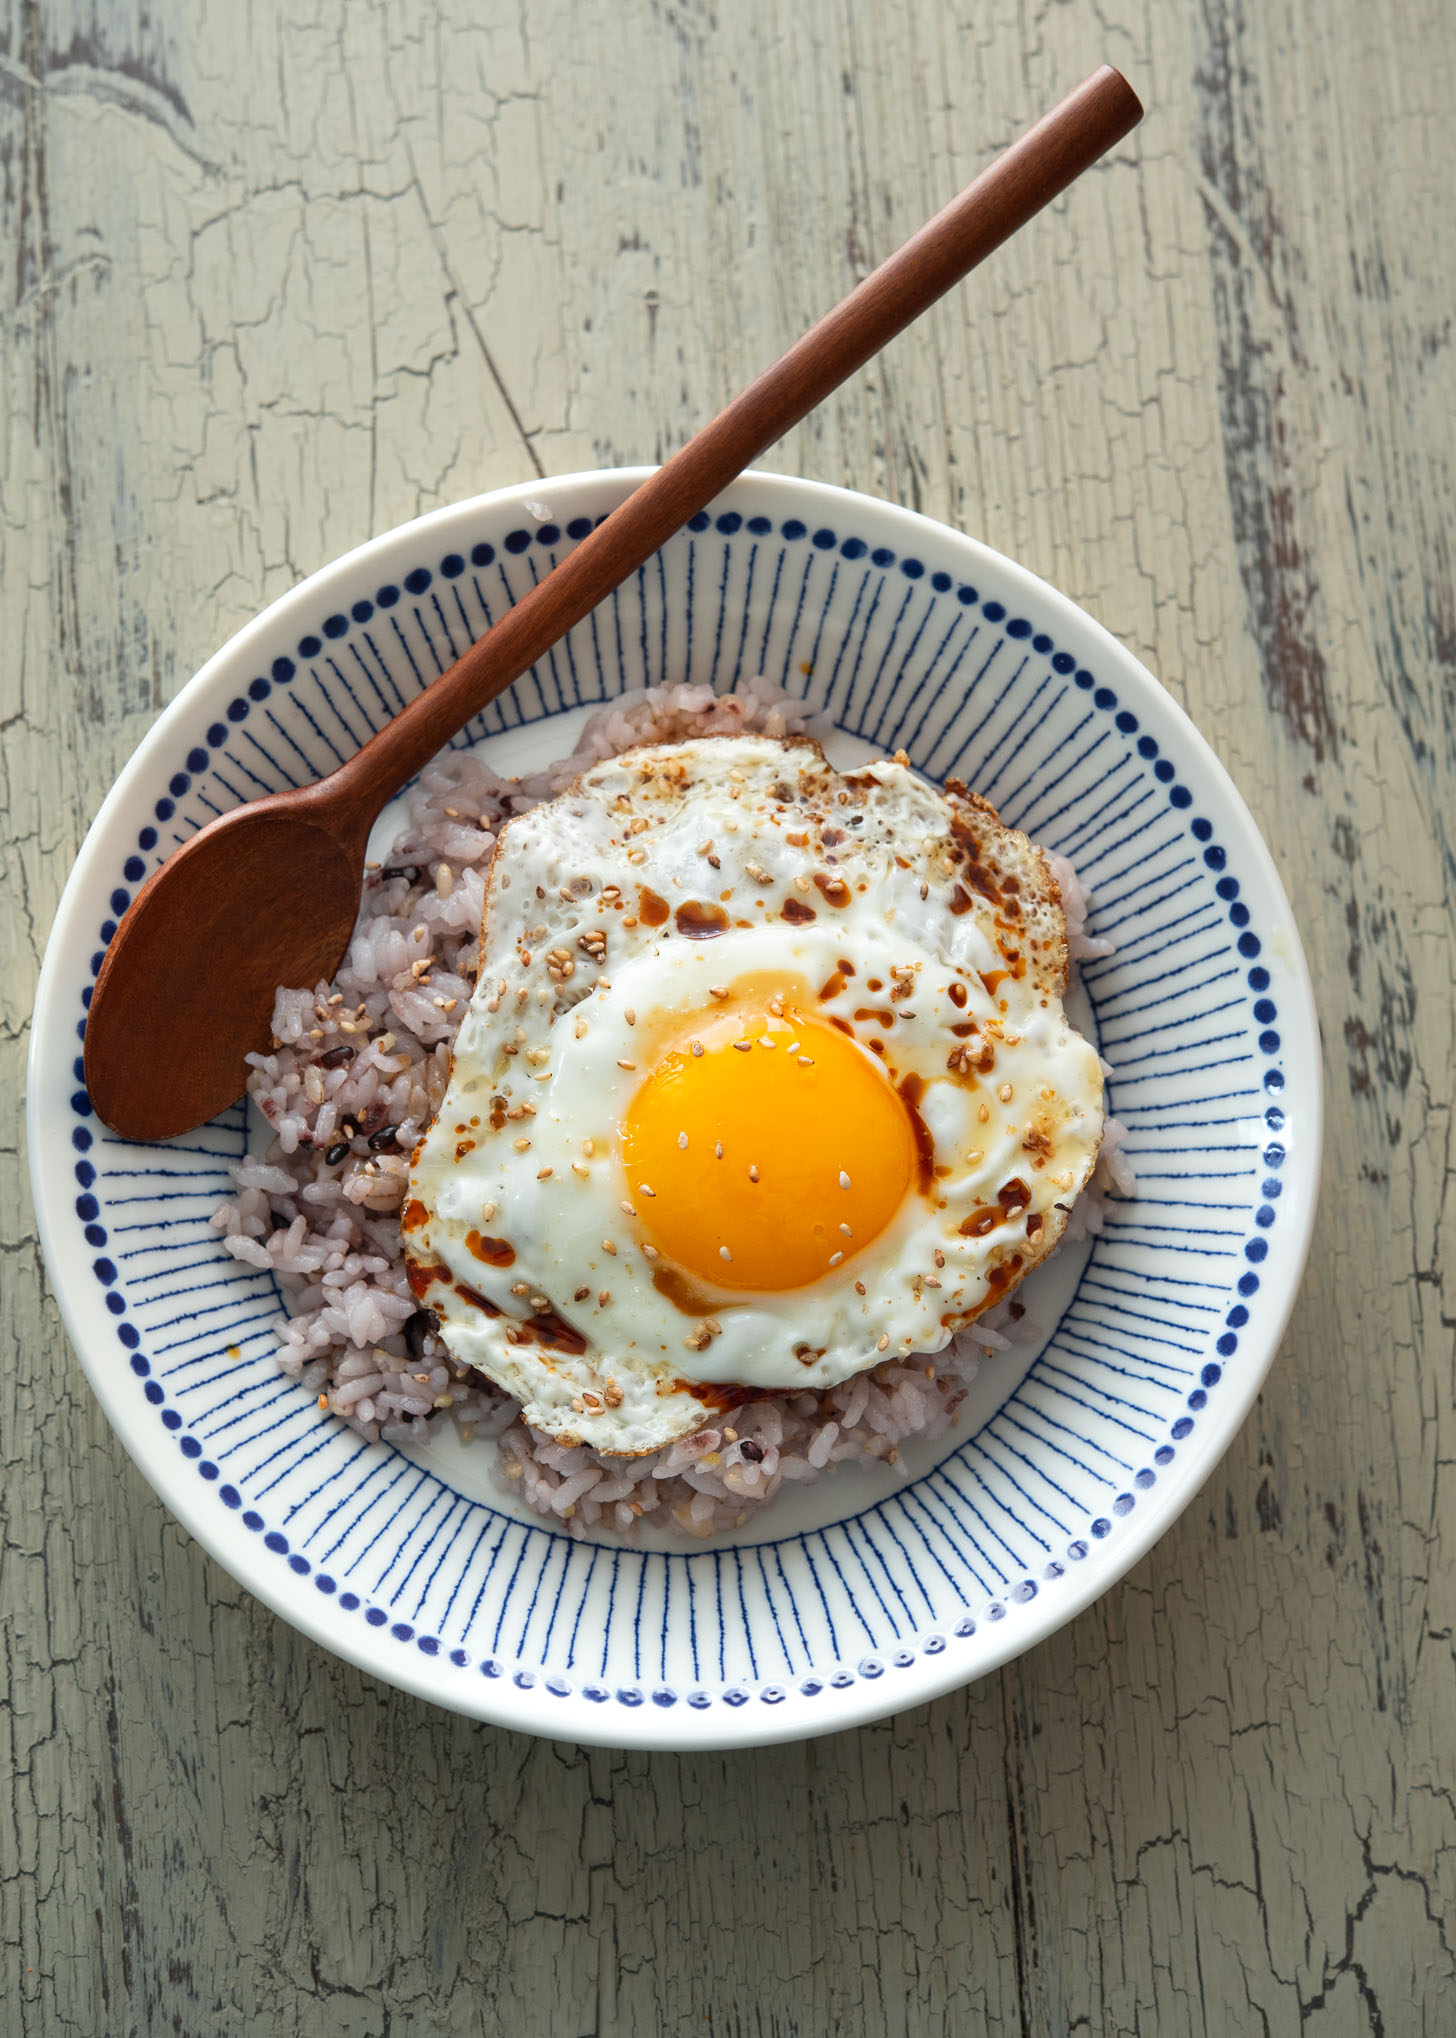 A bowl of gyeran bap (Korean fried egg with rice) with sesame seeds topping.